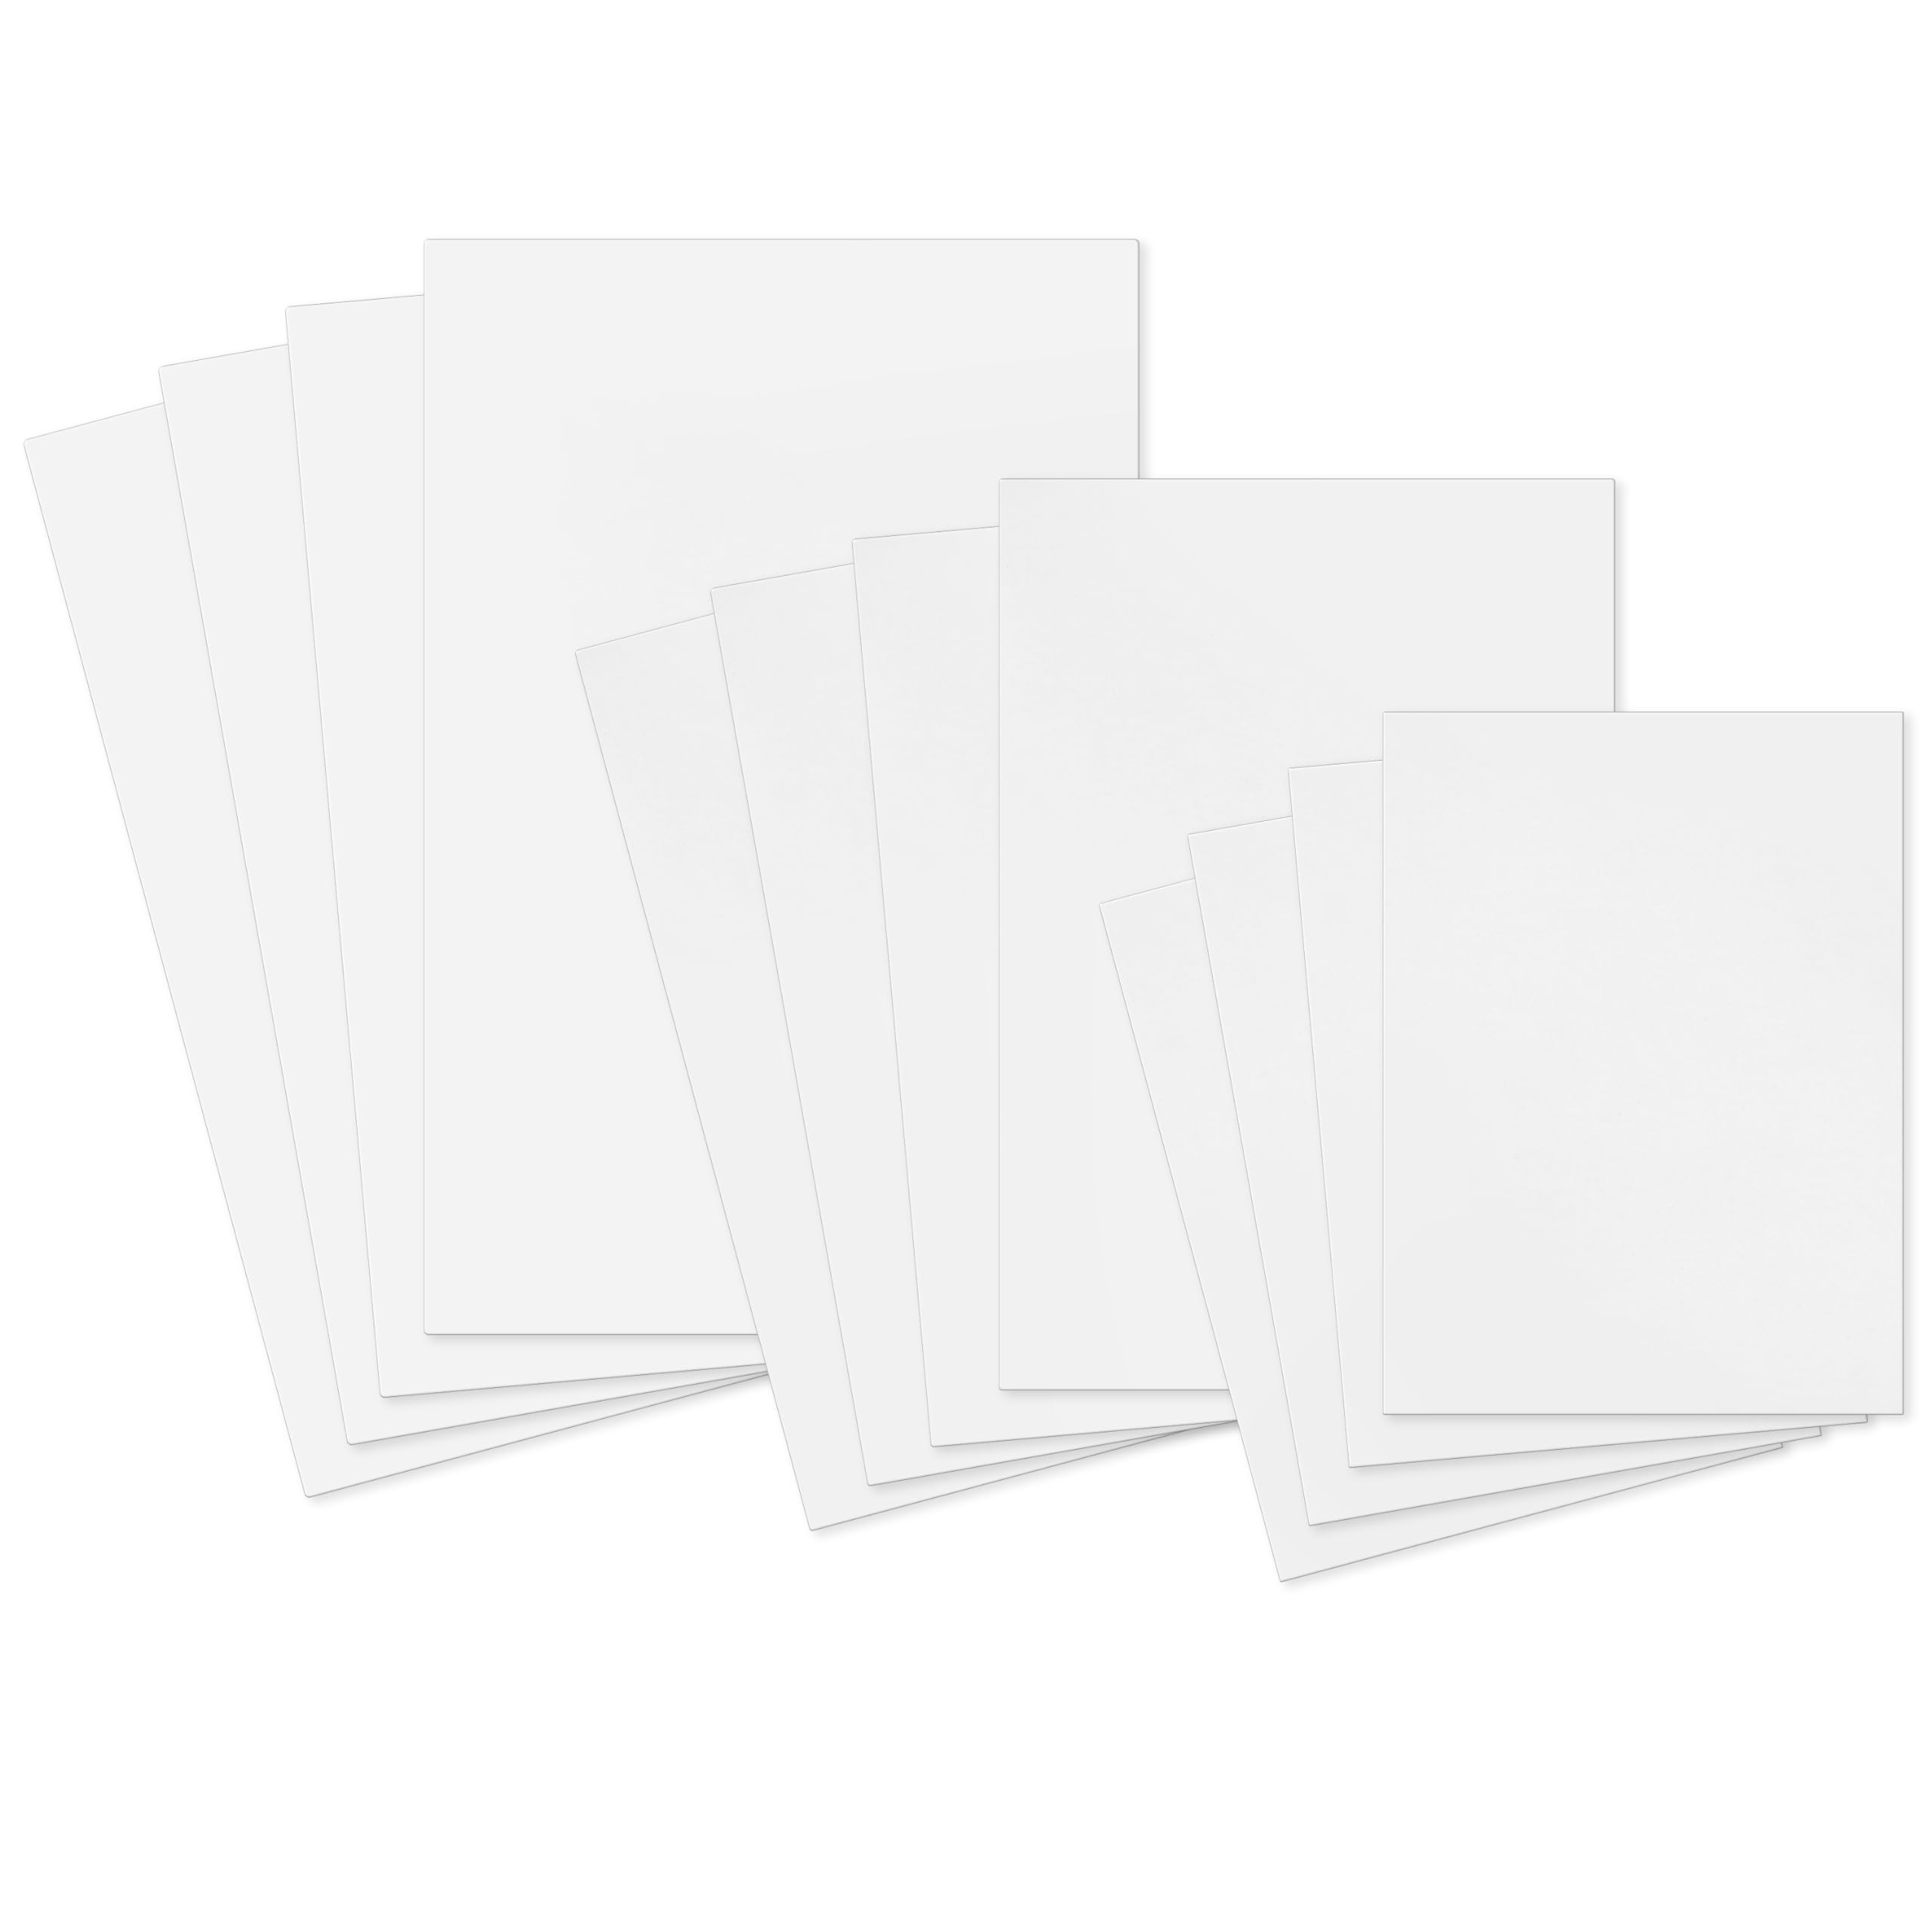 Hallmark White Gift Boxes, Assorted Sizes (12 Boxes with Lids: 4 Small 11